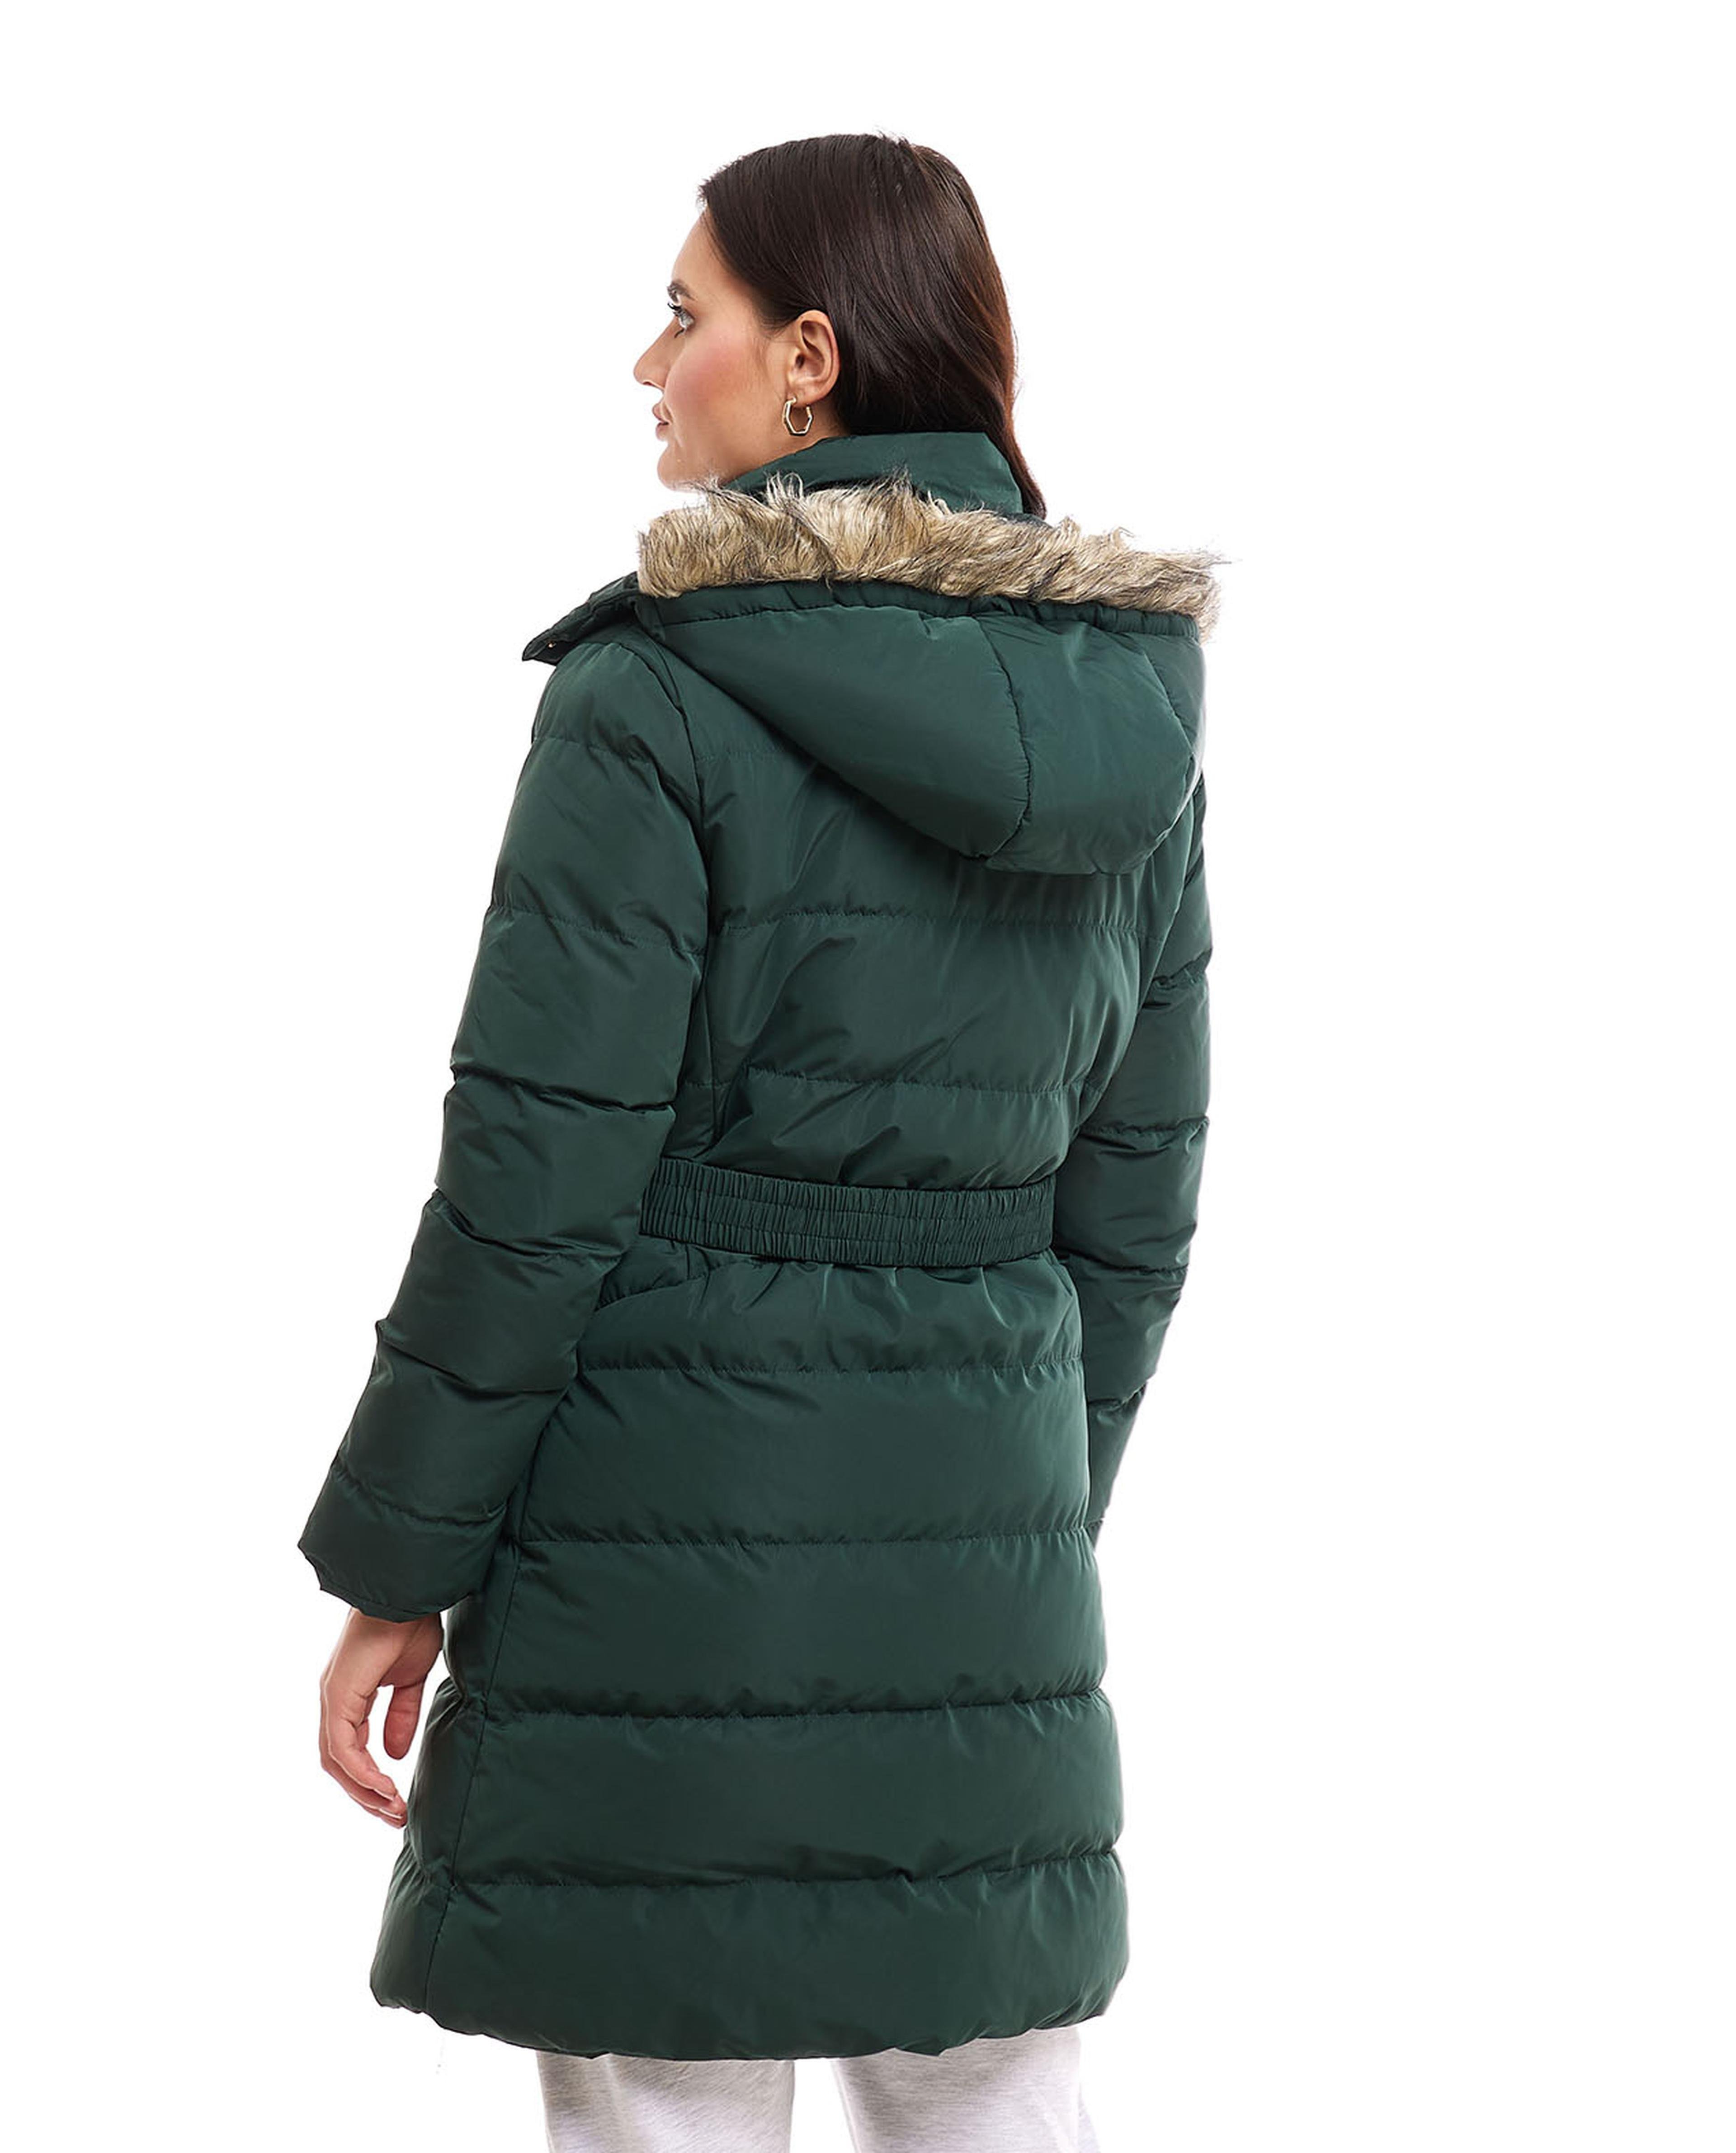 Furry Hooded Puffer Jacket with Zipper Closure